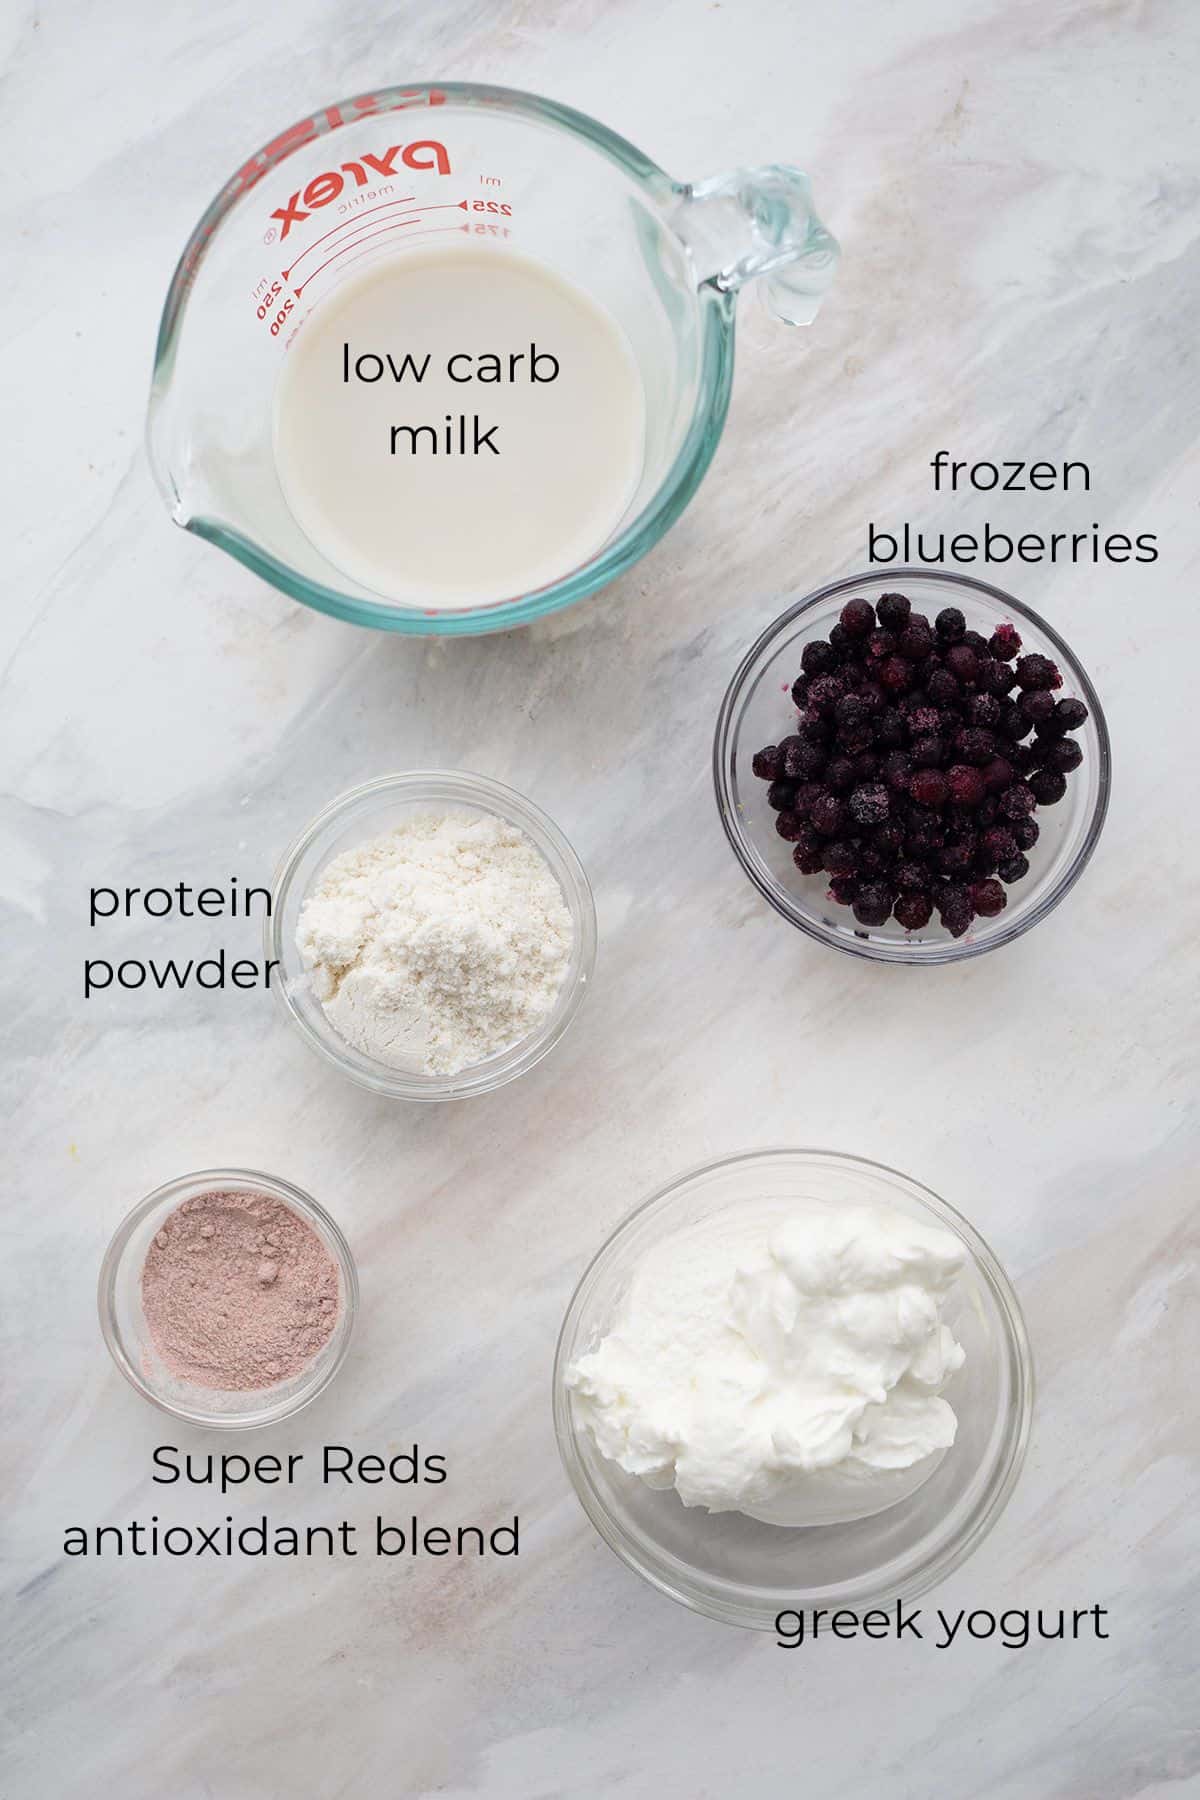 Top down image of ingredients needed for Keto Blueberry Smoothies.